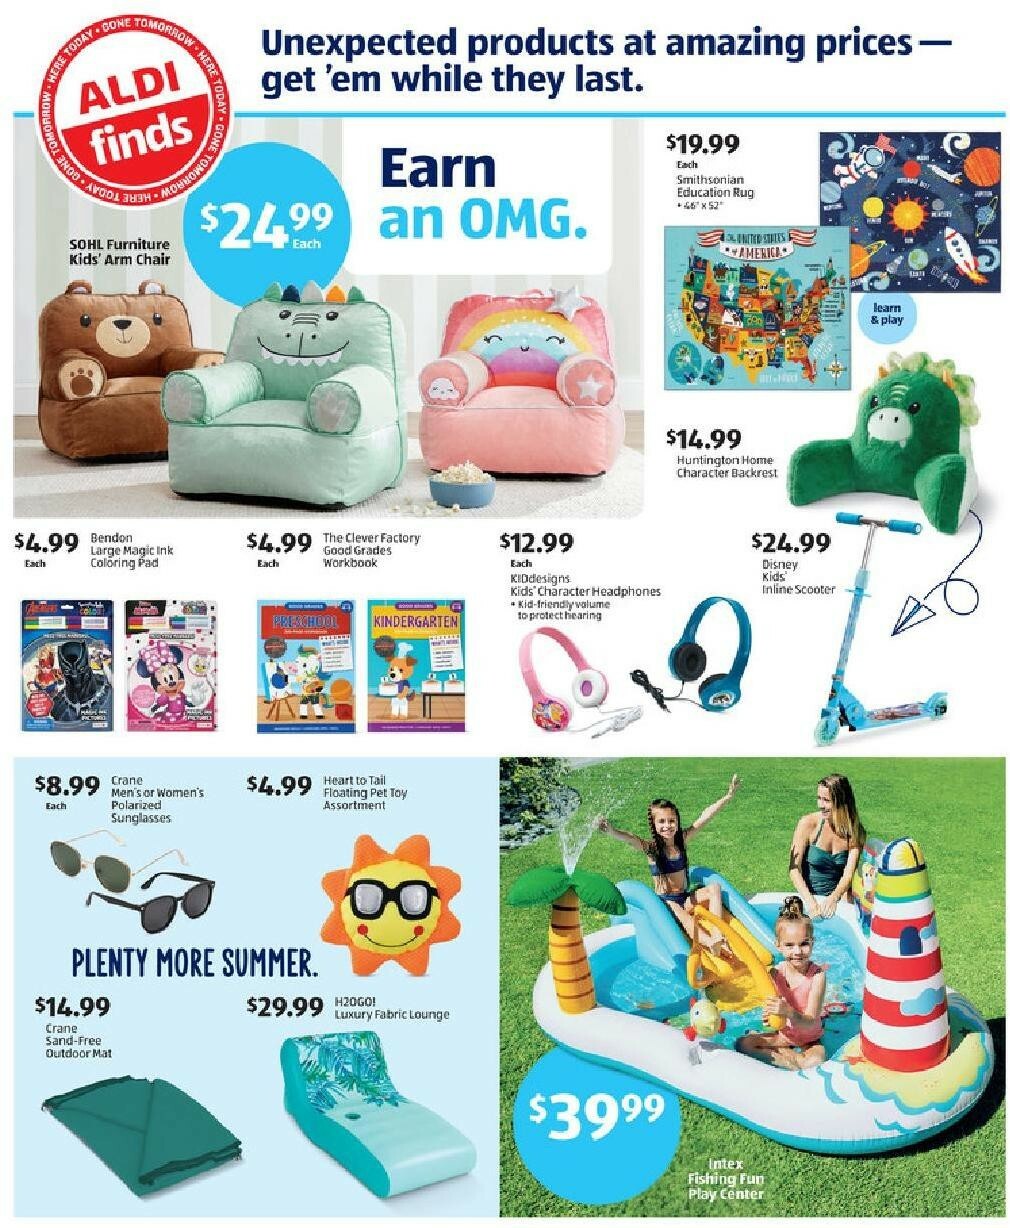 ALDI US Weekly Ads & Special Buys from July 24 Page 3